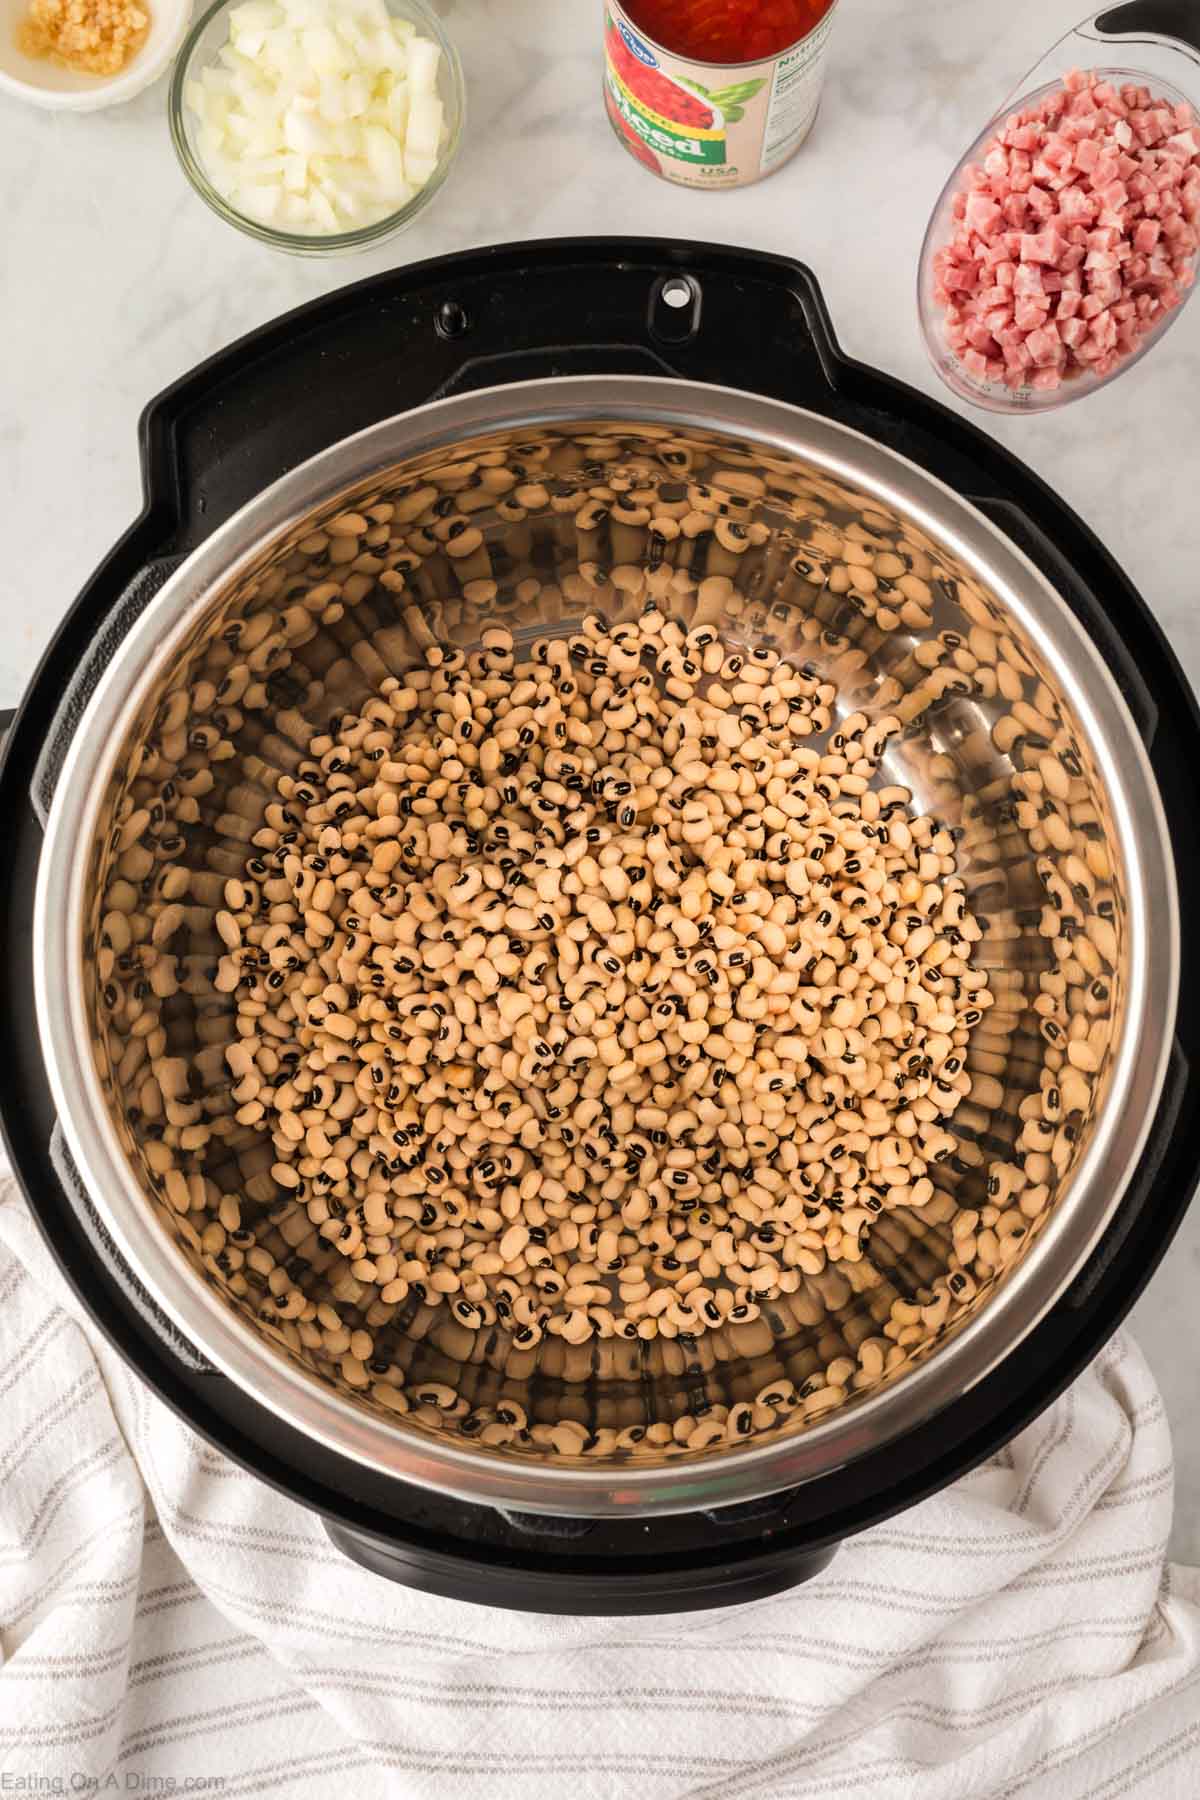 Placing the black eyed peas in the instant pot